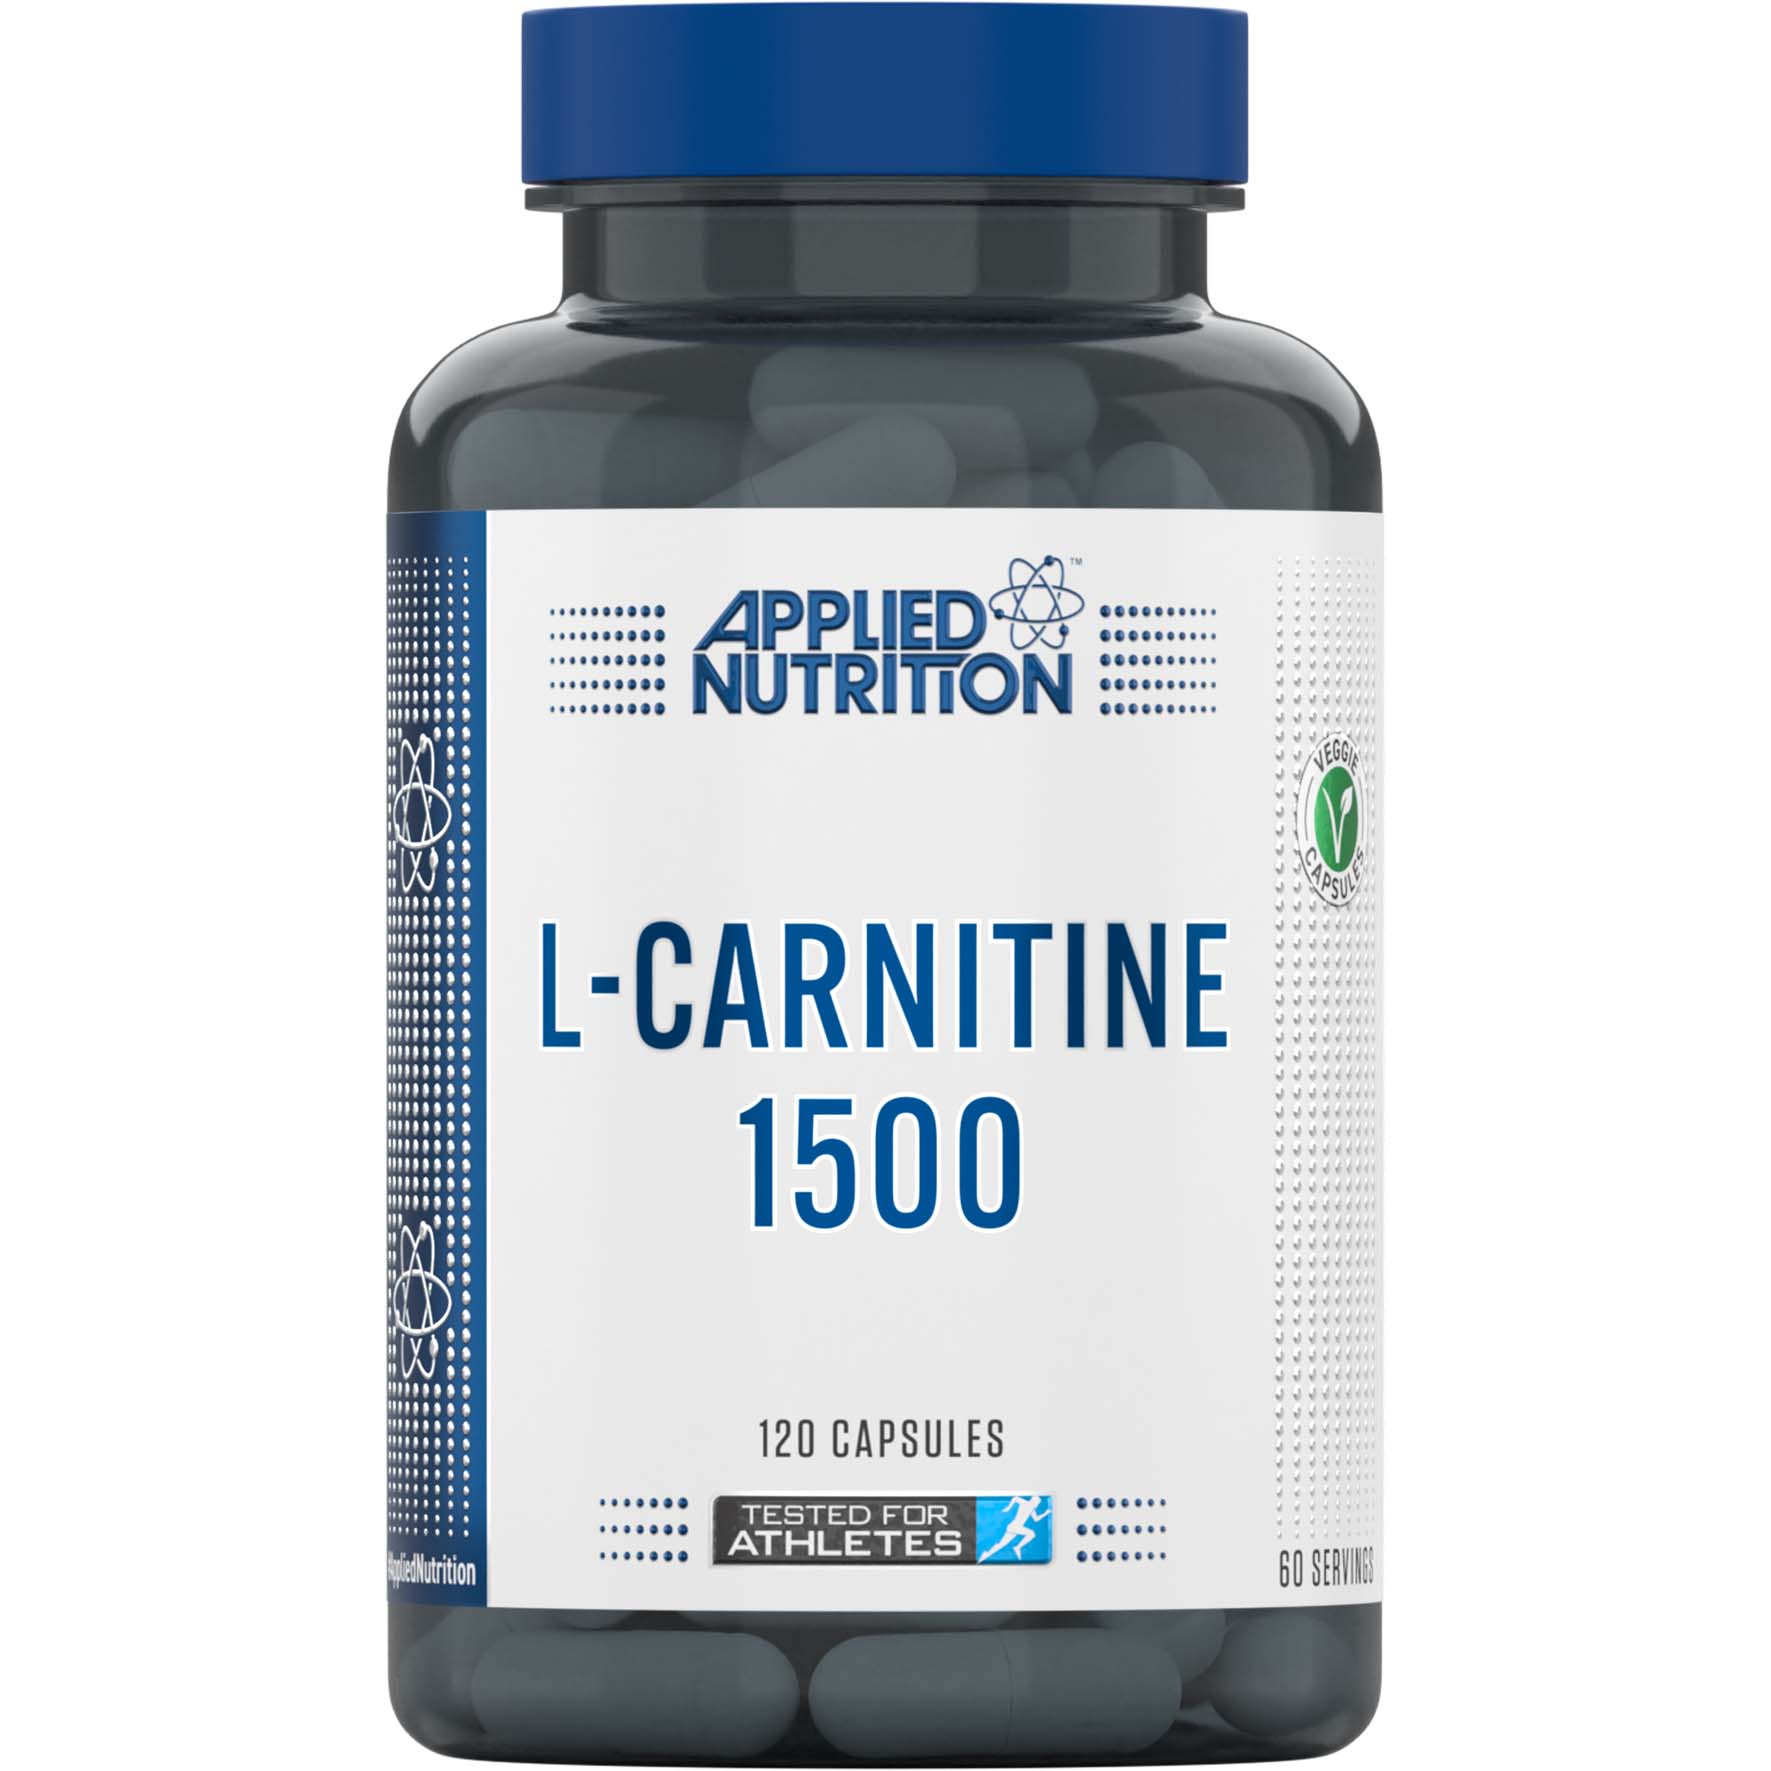 Applied Nutrition L Carnitine 120 Capsules